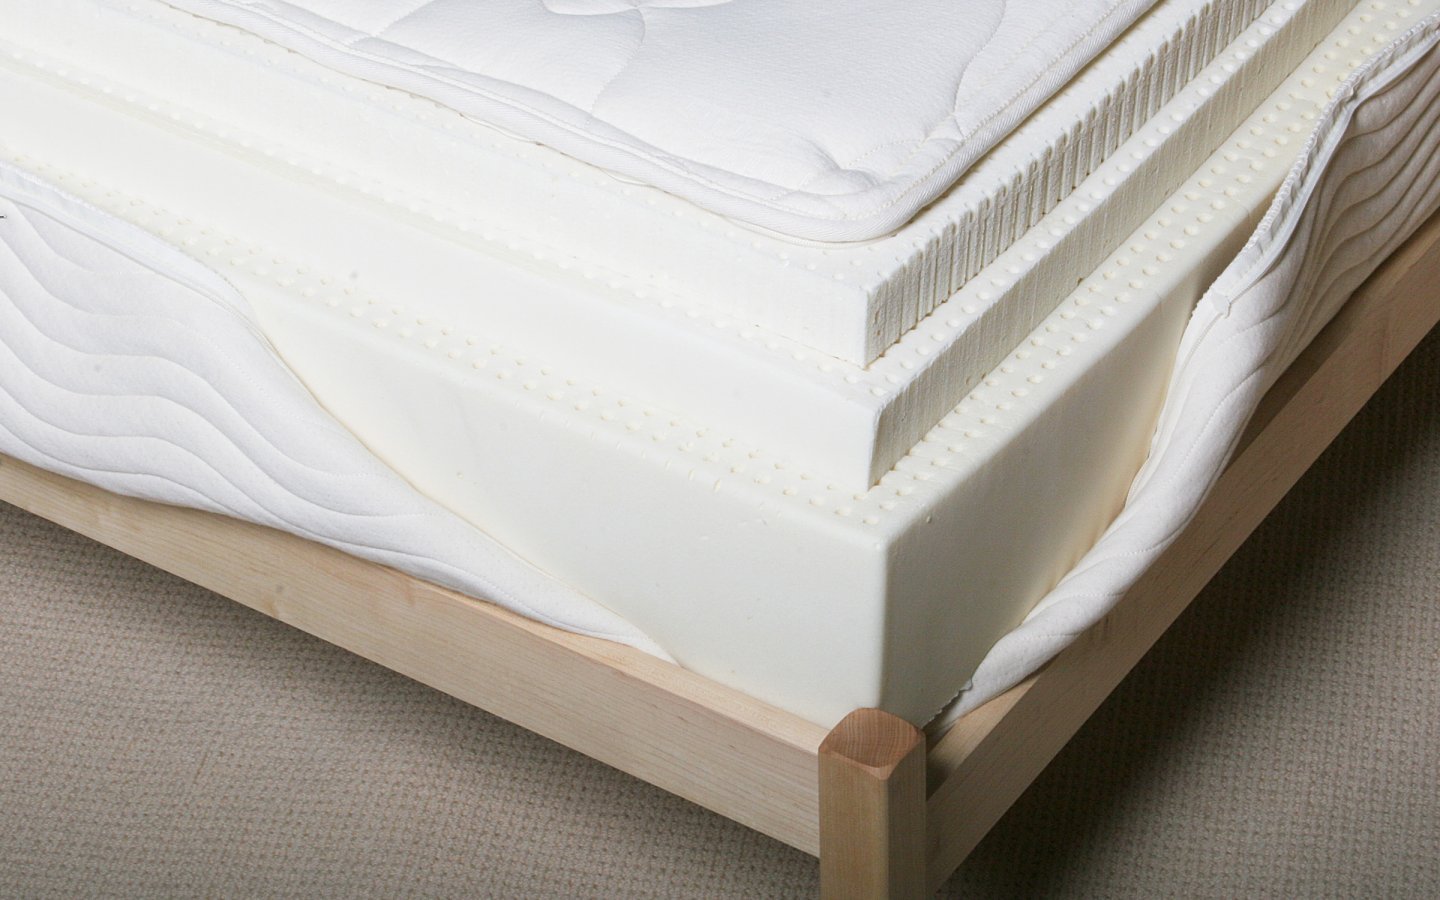 Detailed view of 10 inch latex mattress showing 3 layers of natural Talalay latex.